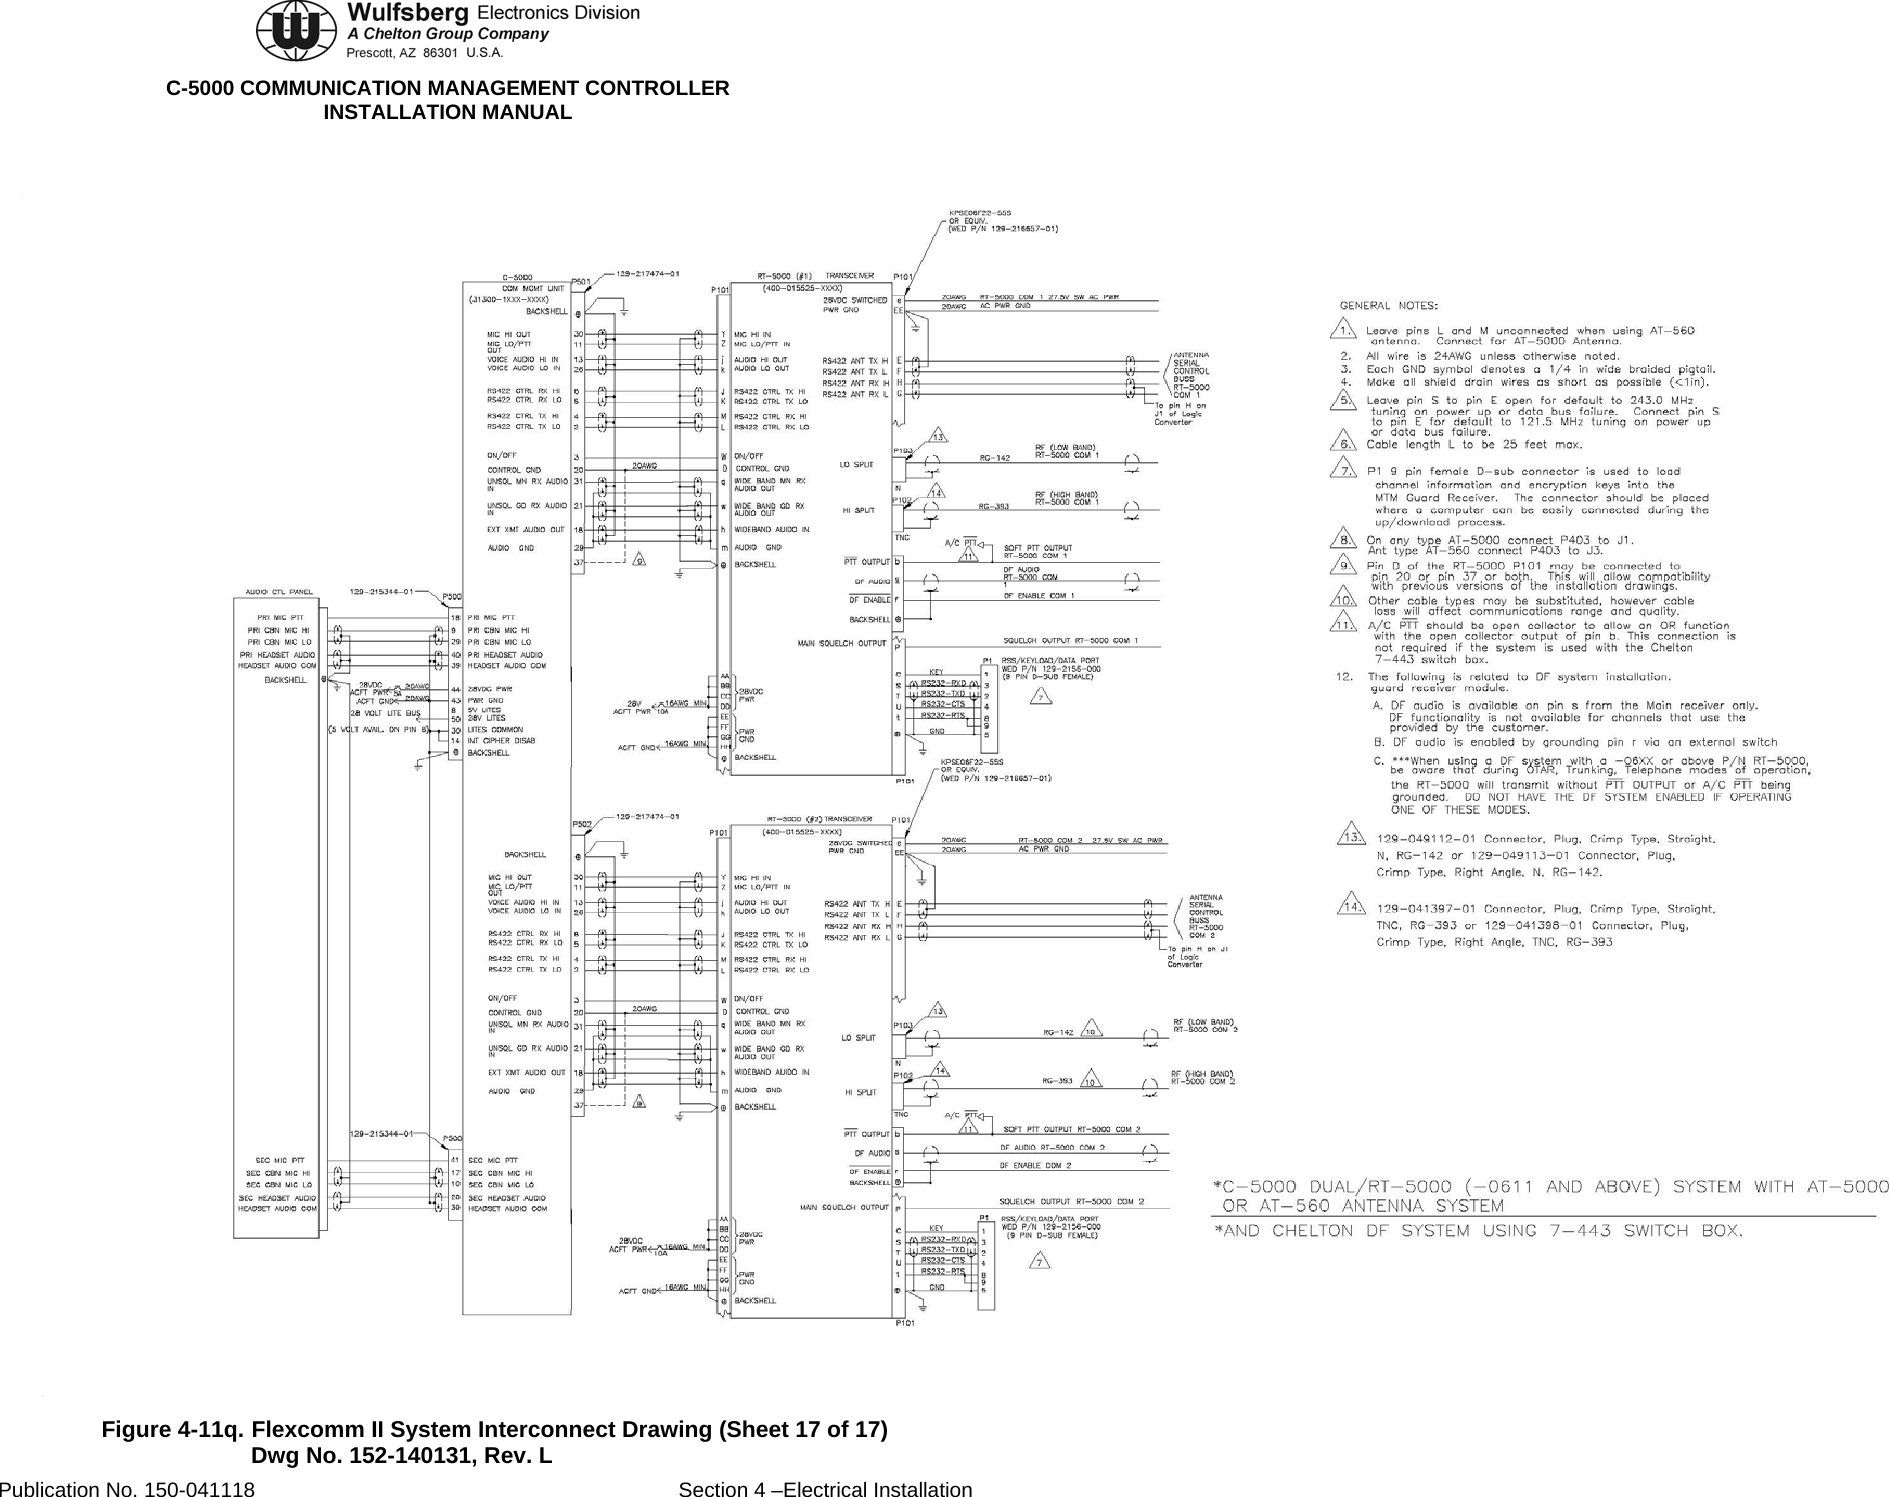  C-5000 COMMUNICATION MANAGEMENT CONTROLLER INSTALLATION MANUAL  Figure 4-11q. Flexcomm II System Interconnect Drawing (Sheet 17 of 17) Dwg No. 152-140131, Rev. L Publication No. 150-041118  Section 4 –Electrical Installation 